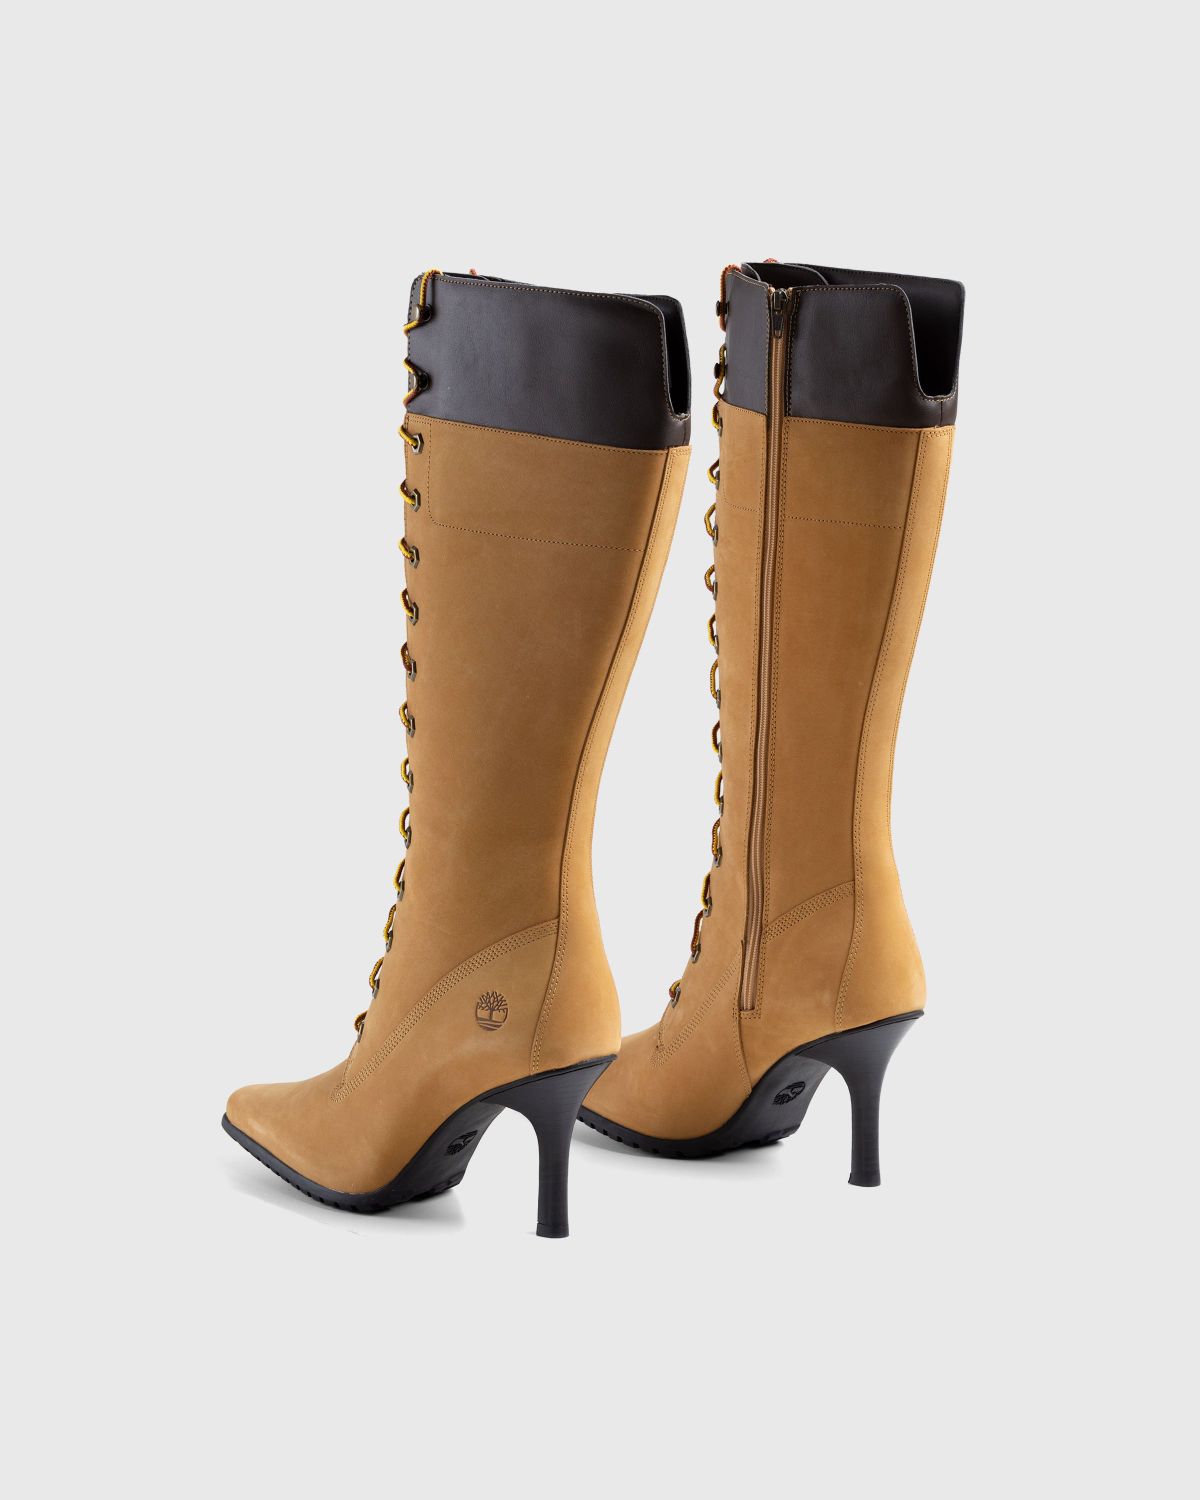 Veneda Carter x Timberland – Tall Lace Boot Yellow - Boots - Brown - Image 2